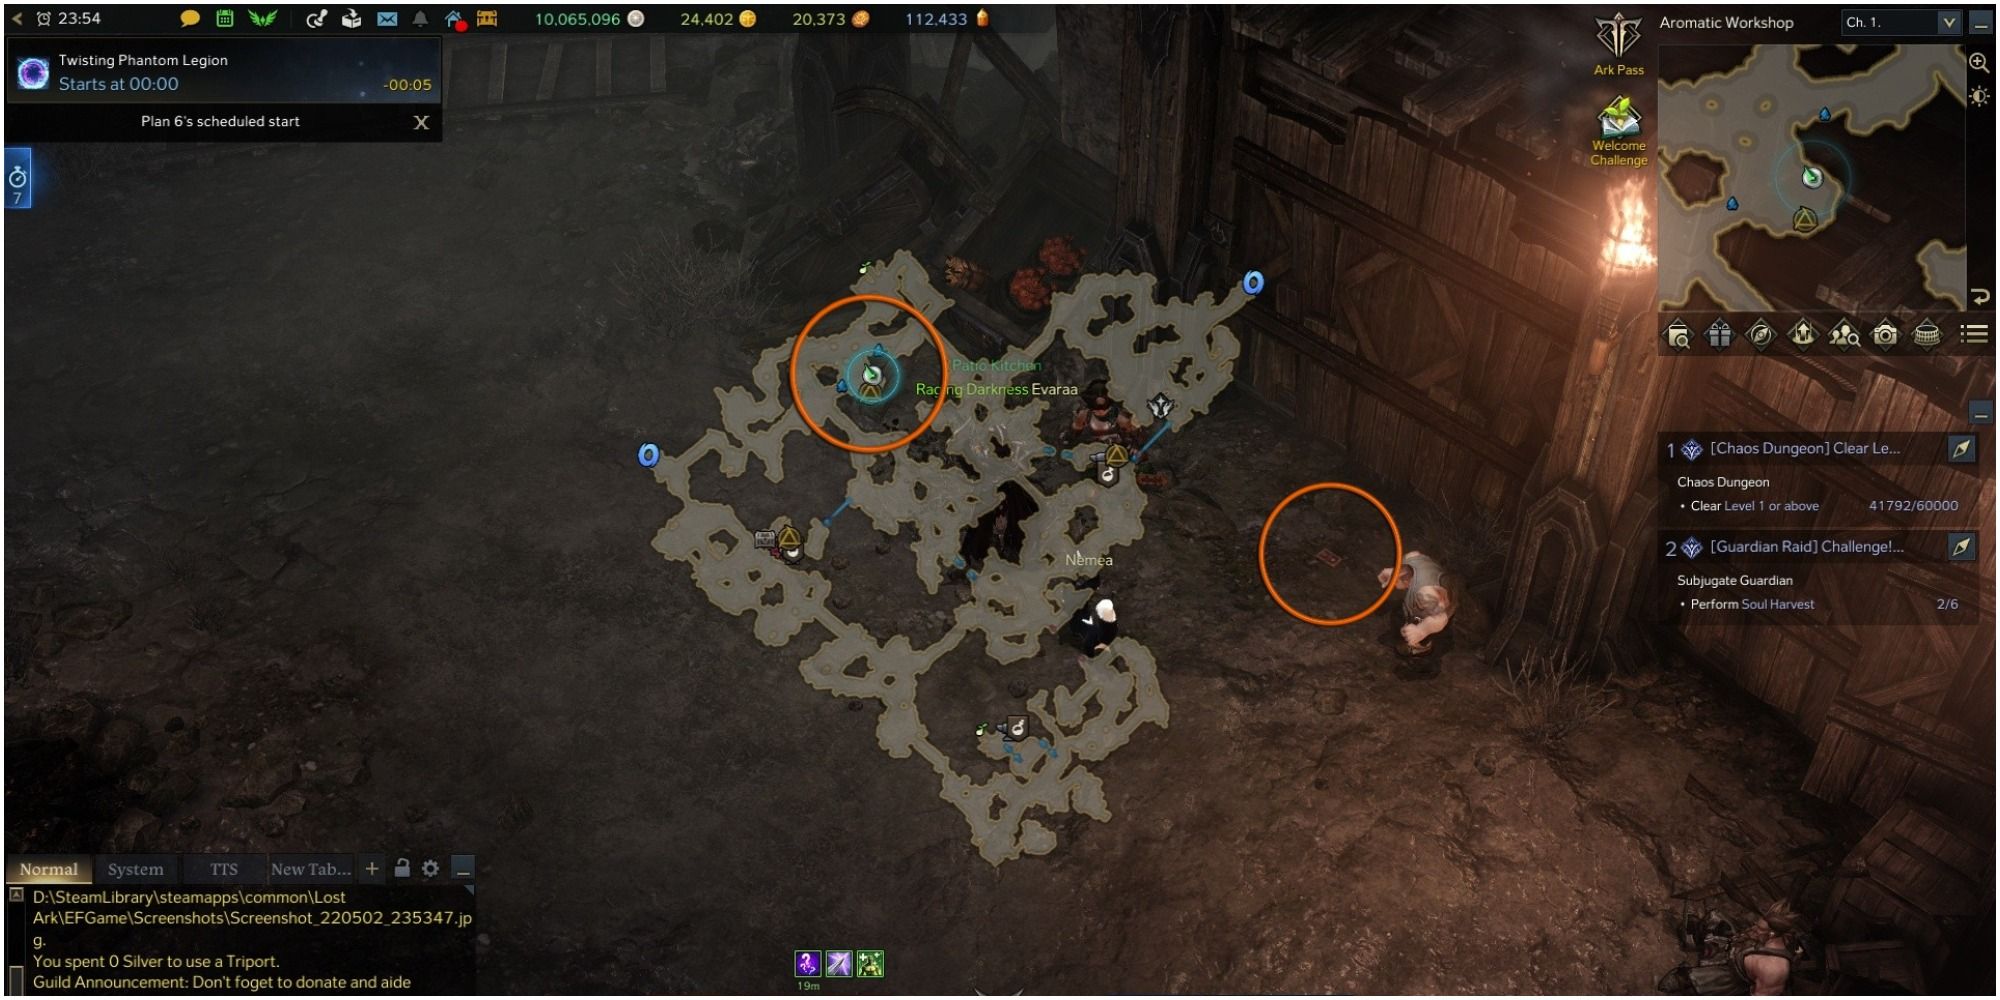 Lost Ark Yorn's Hidden Story 1-3 location with mini-map open, orange circle around object and player icon